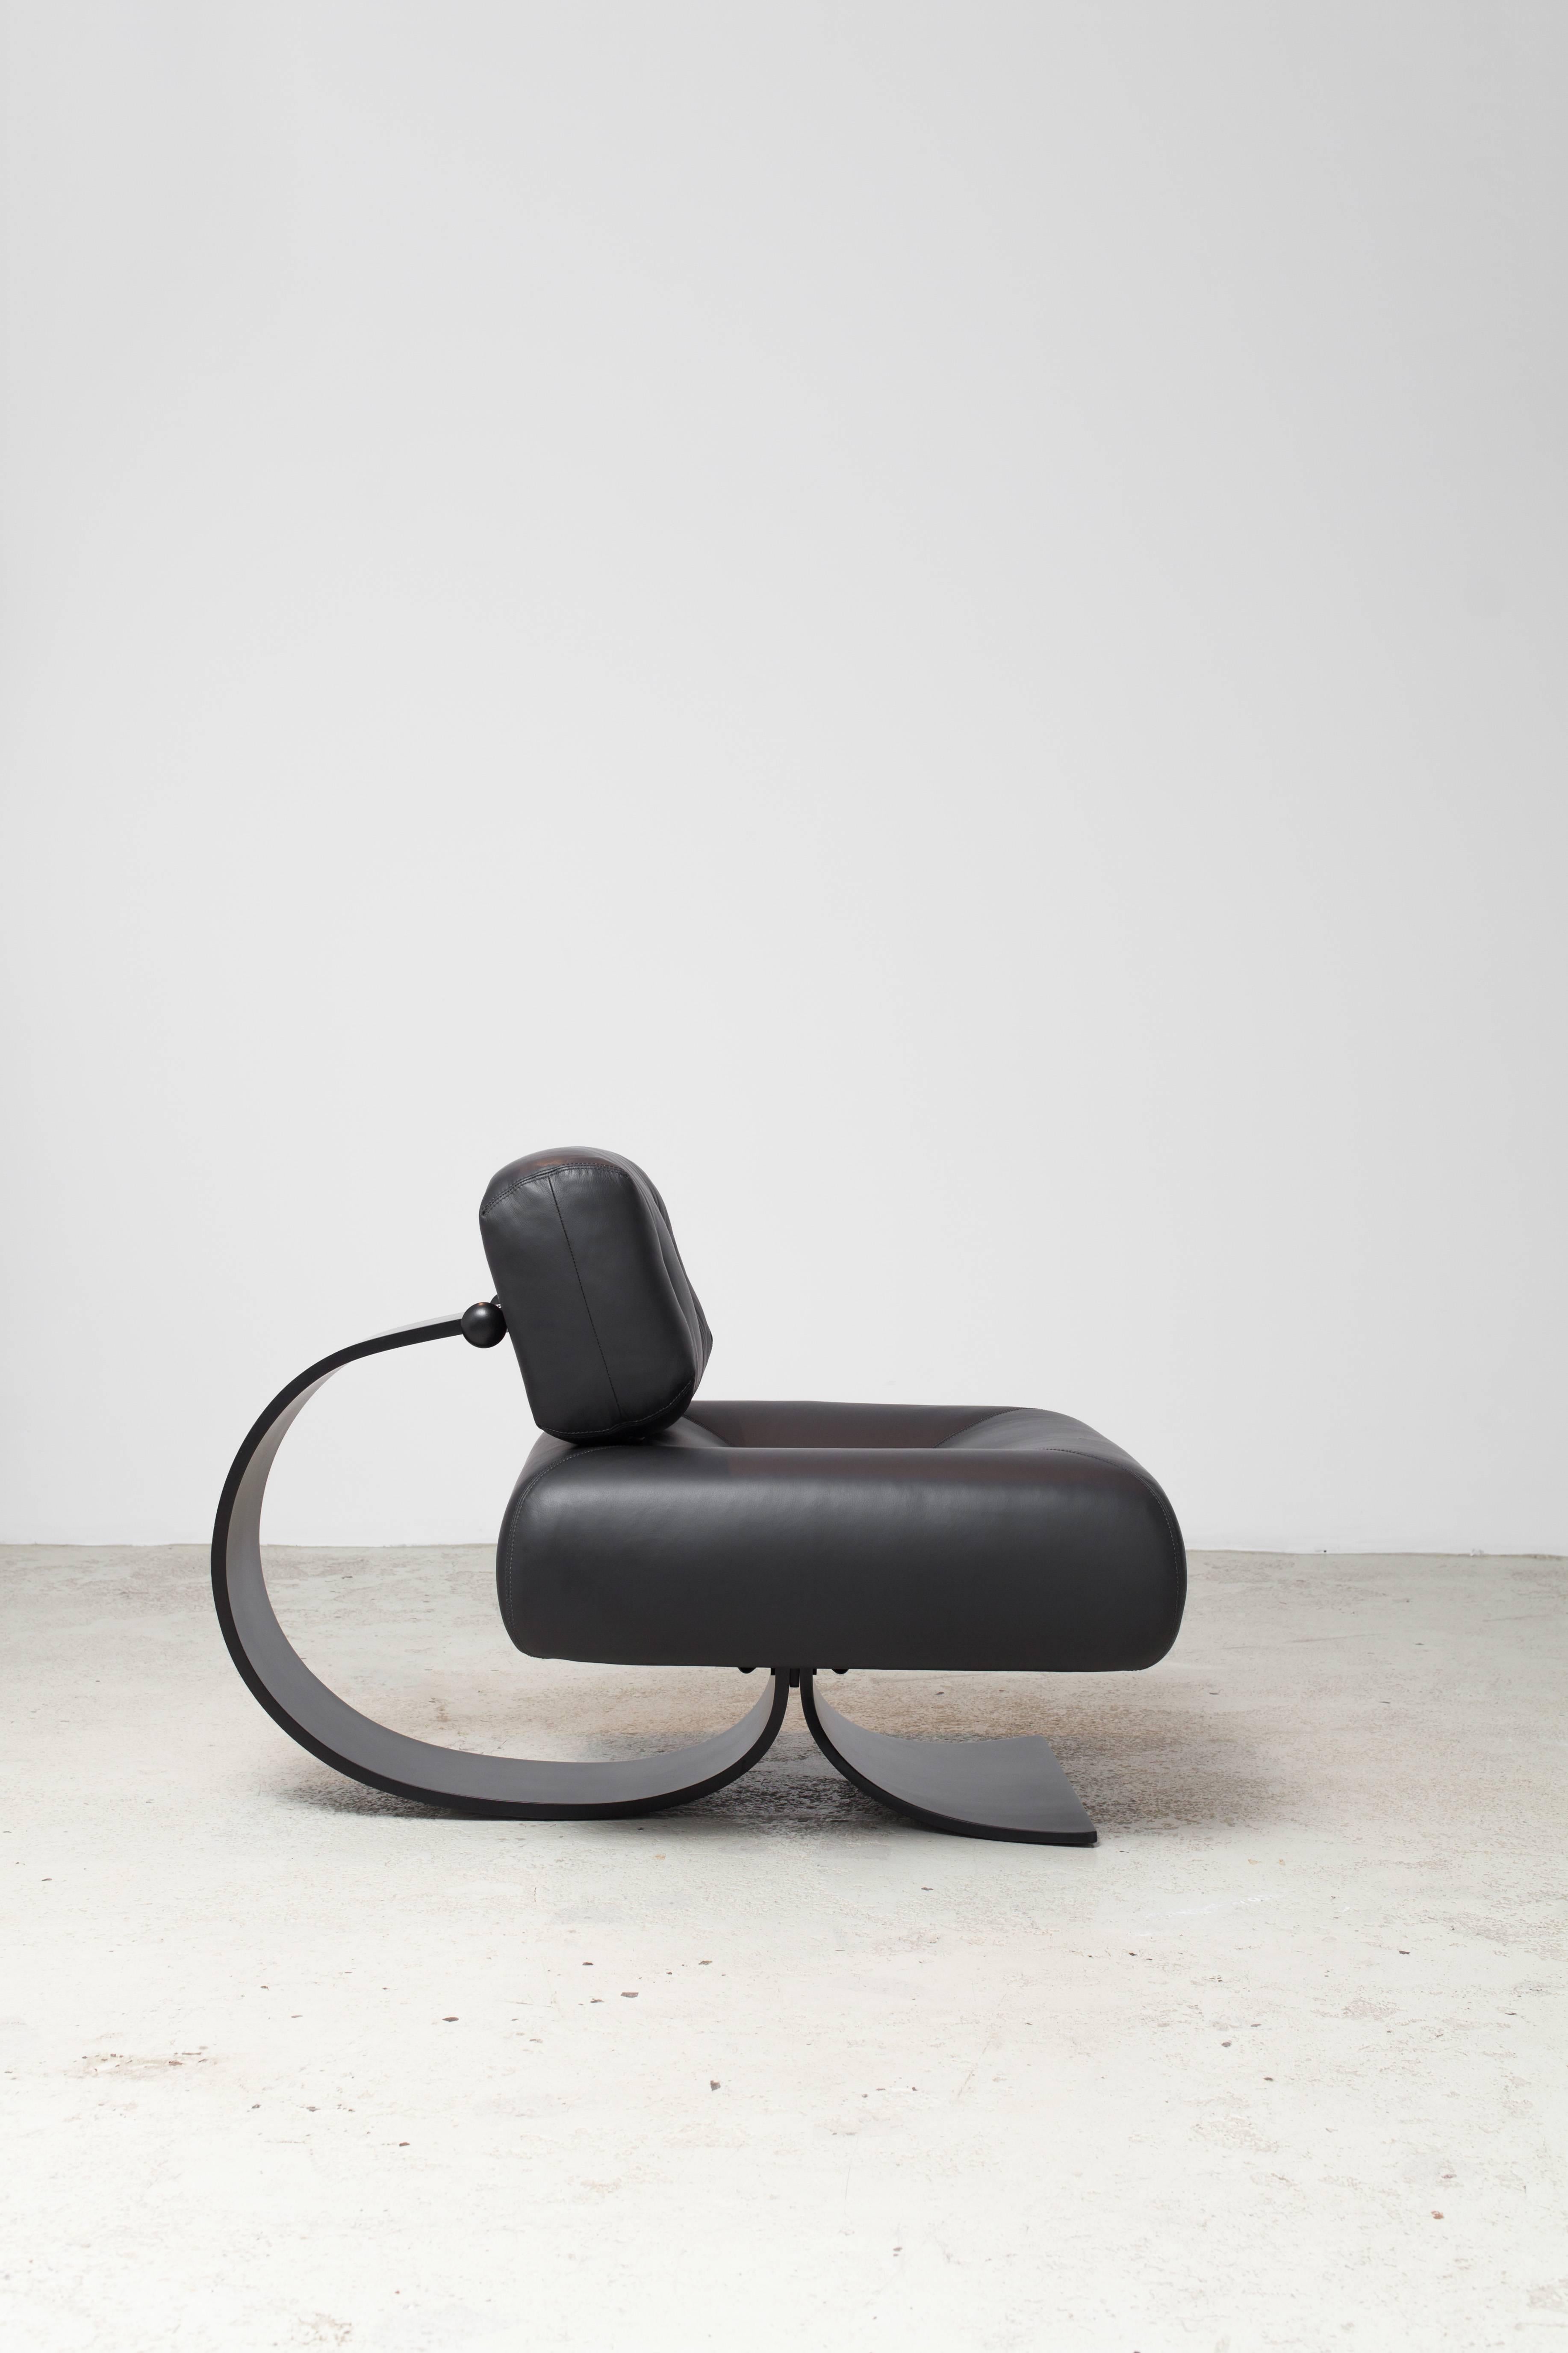 Alta chair and ottoman set designed by Oscar Niemyer was the first piece of furniture the legendary architect designed, along with his daughter Anna Maria Niemeyer, in 1971. The 